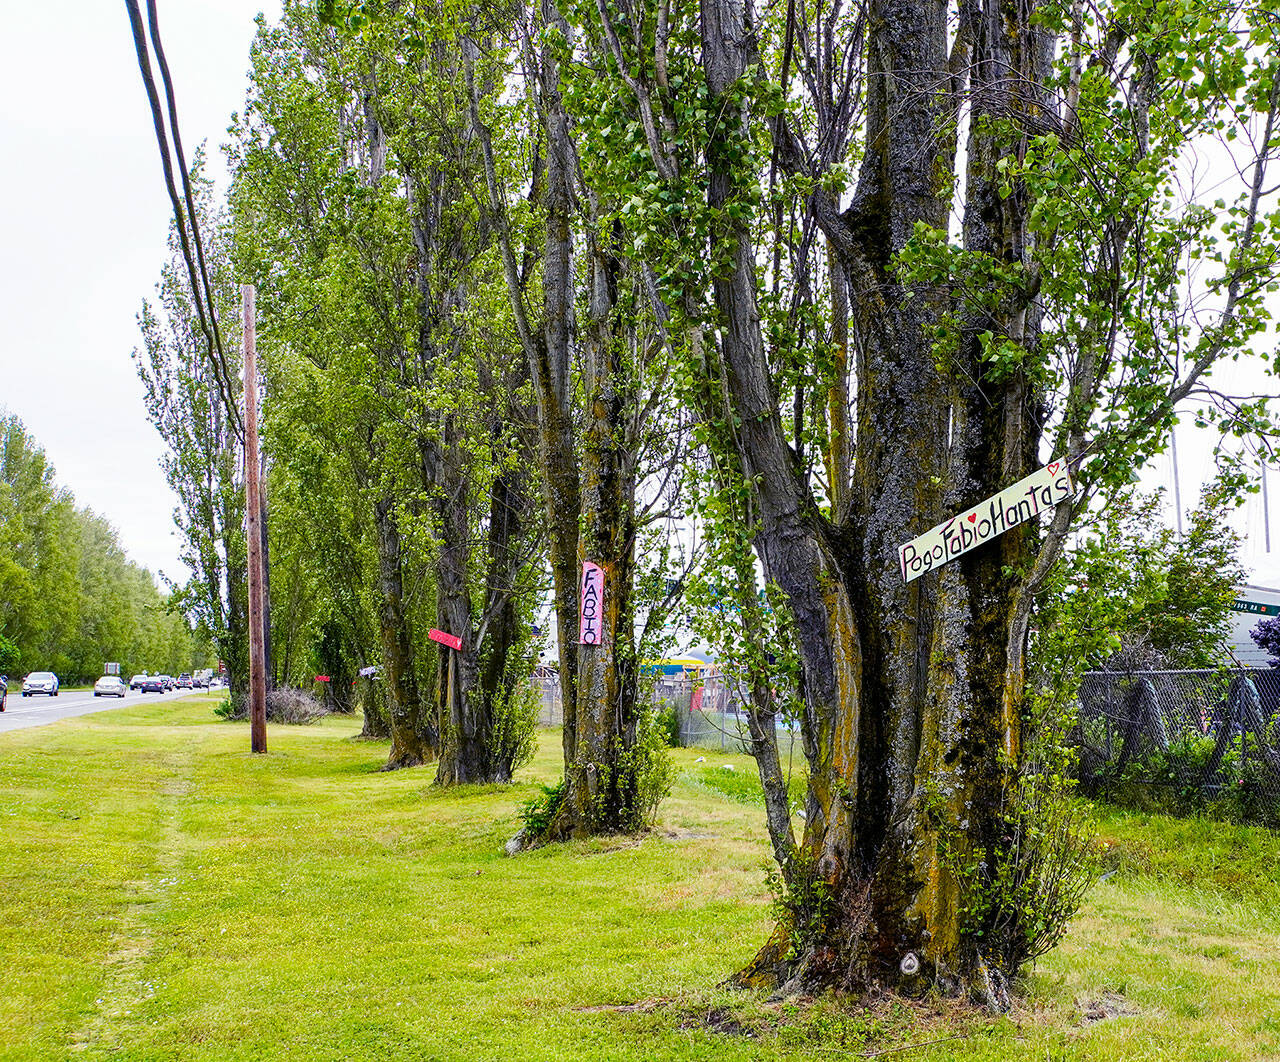 Popular poplar trees on Port of Port Townsend property along the south side of Sims Way in Port Townsend are adorned with Italian names as a result of the Adopt-a-Poplar program instituted by the Gateway Poplar Alliance’s efforts to save them from being cut down. For a donation, a person can choose which poplar to adopt and which Italian name, $50 for a female name and $100 for a male name to be displayed. (Steve Mullensky/For Peninsula Daily News)